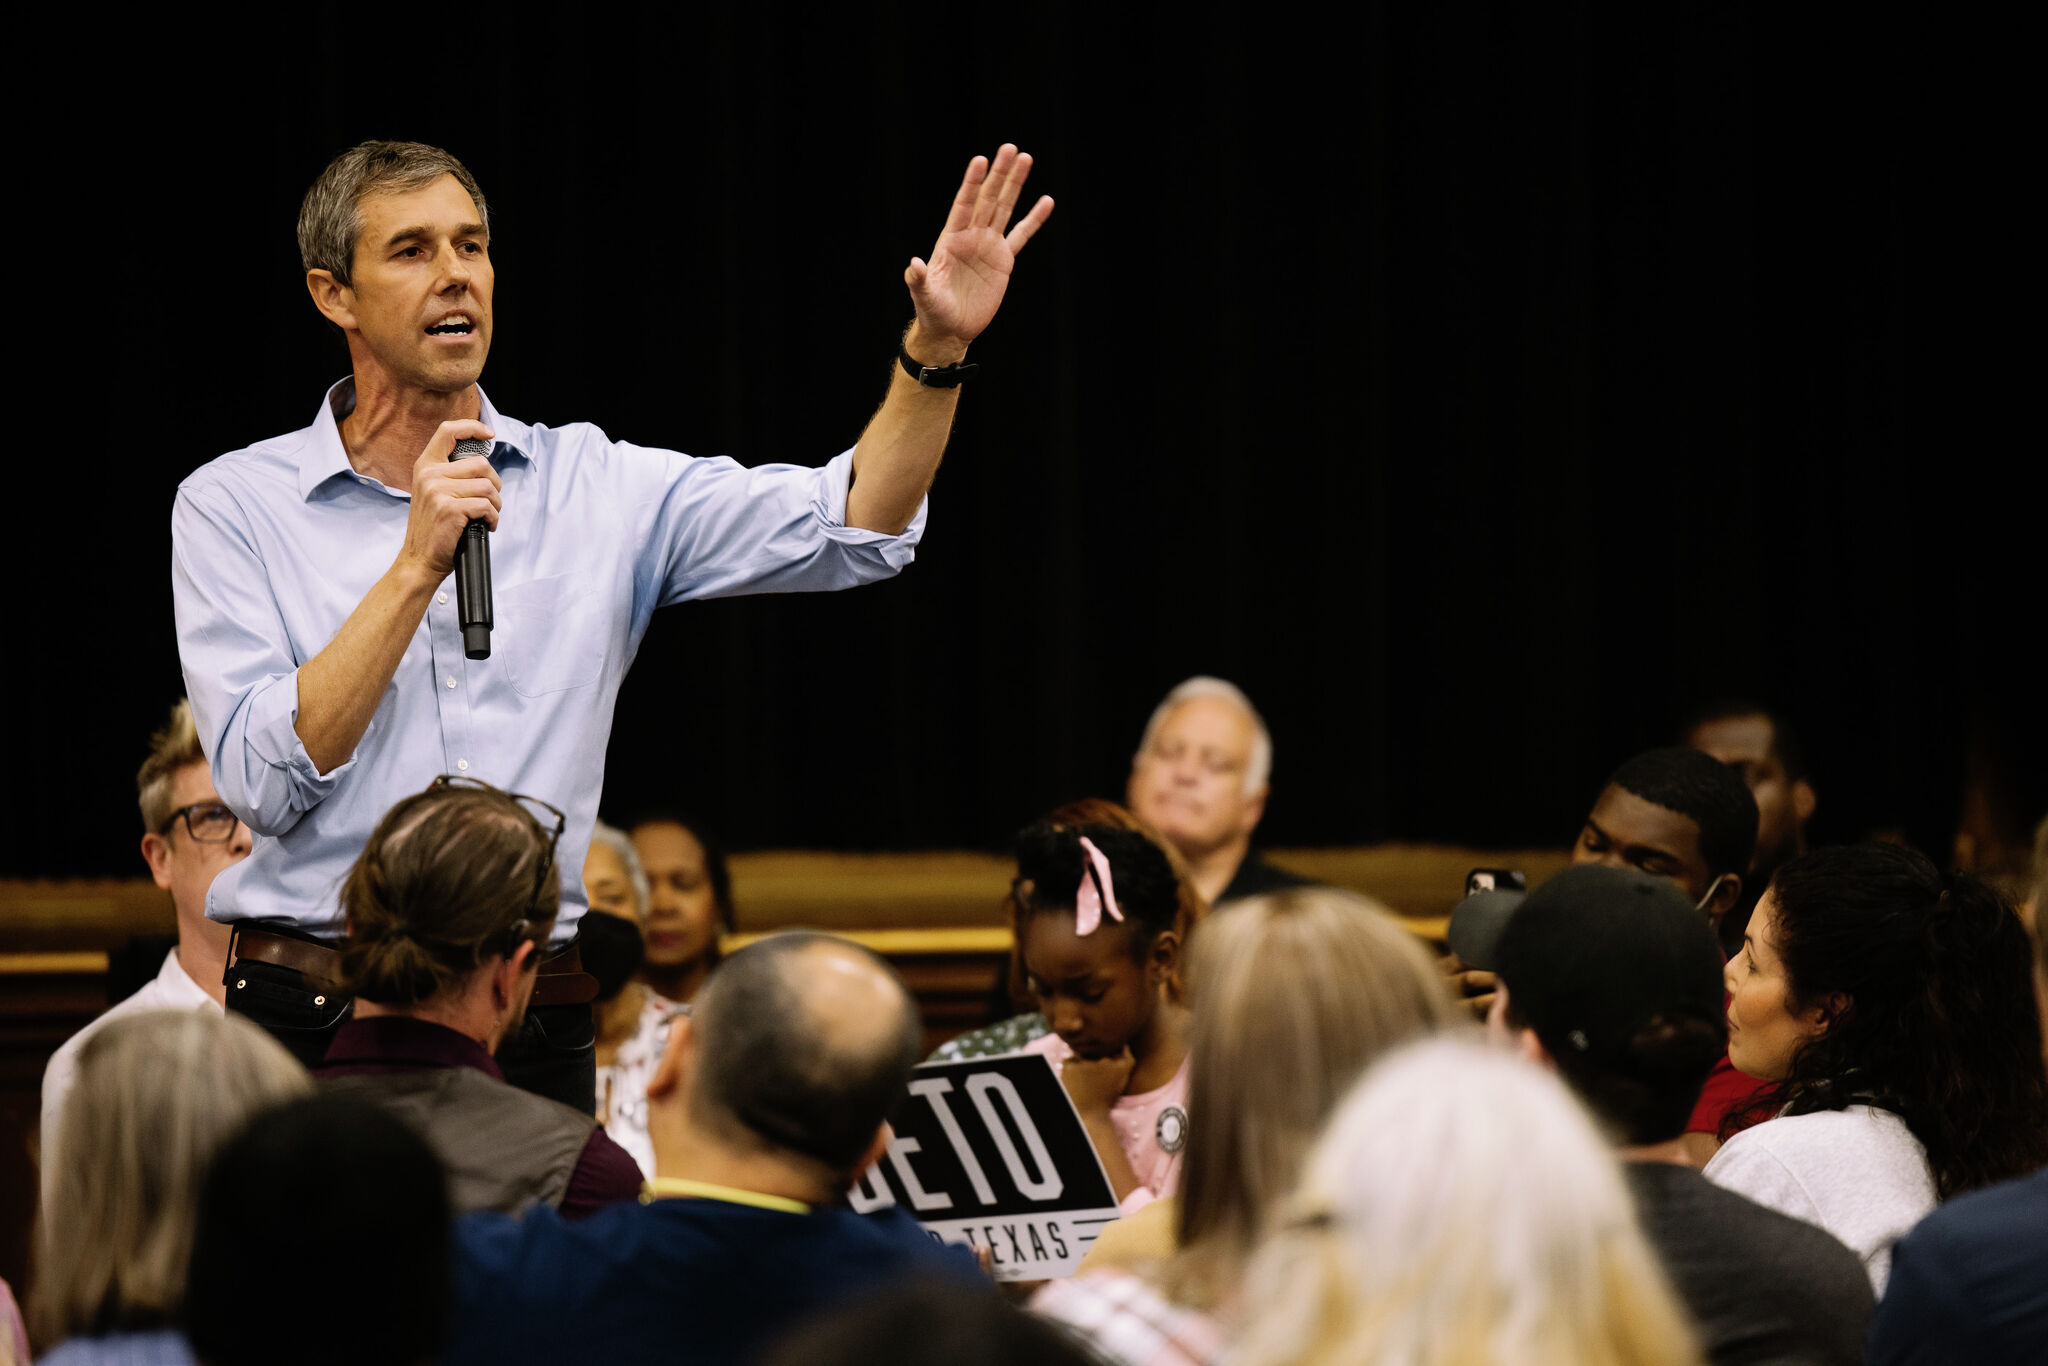  Texas 'preacher' with assault rifle confronts Beto O’Rourke 